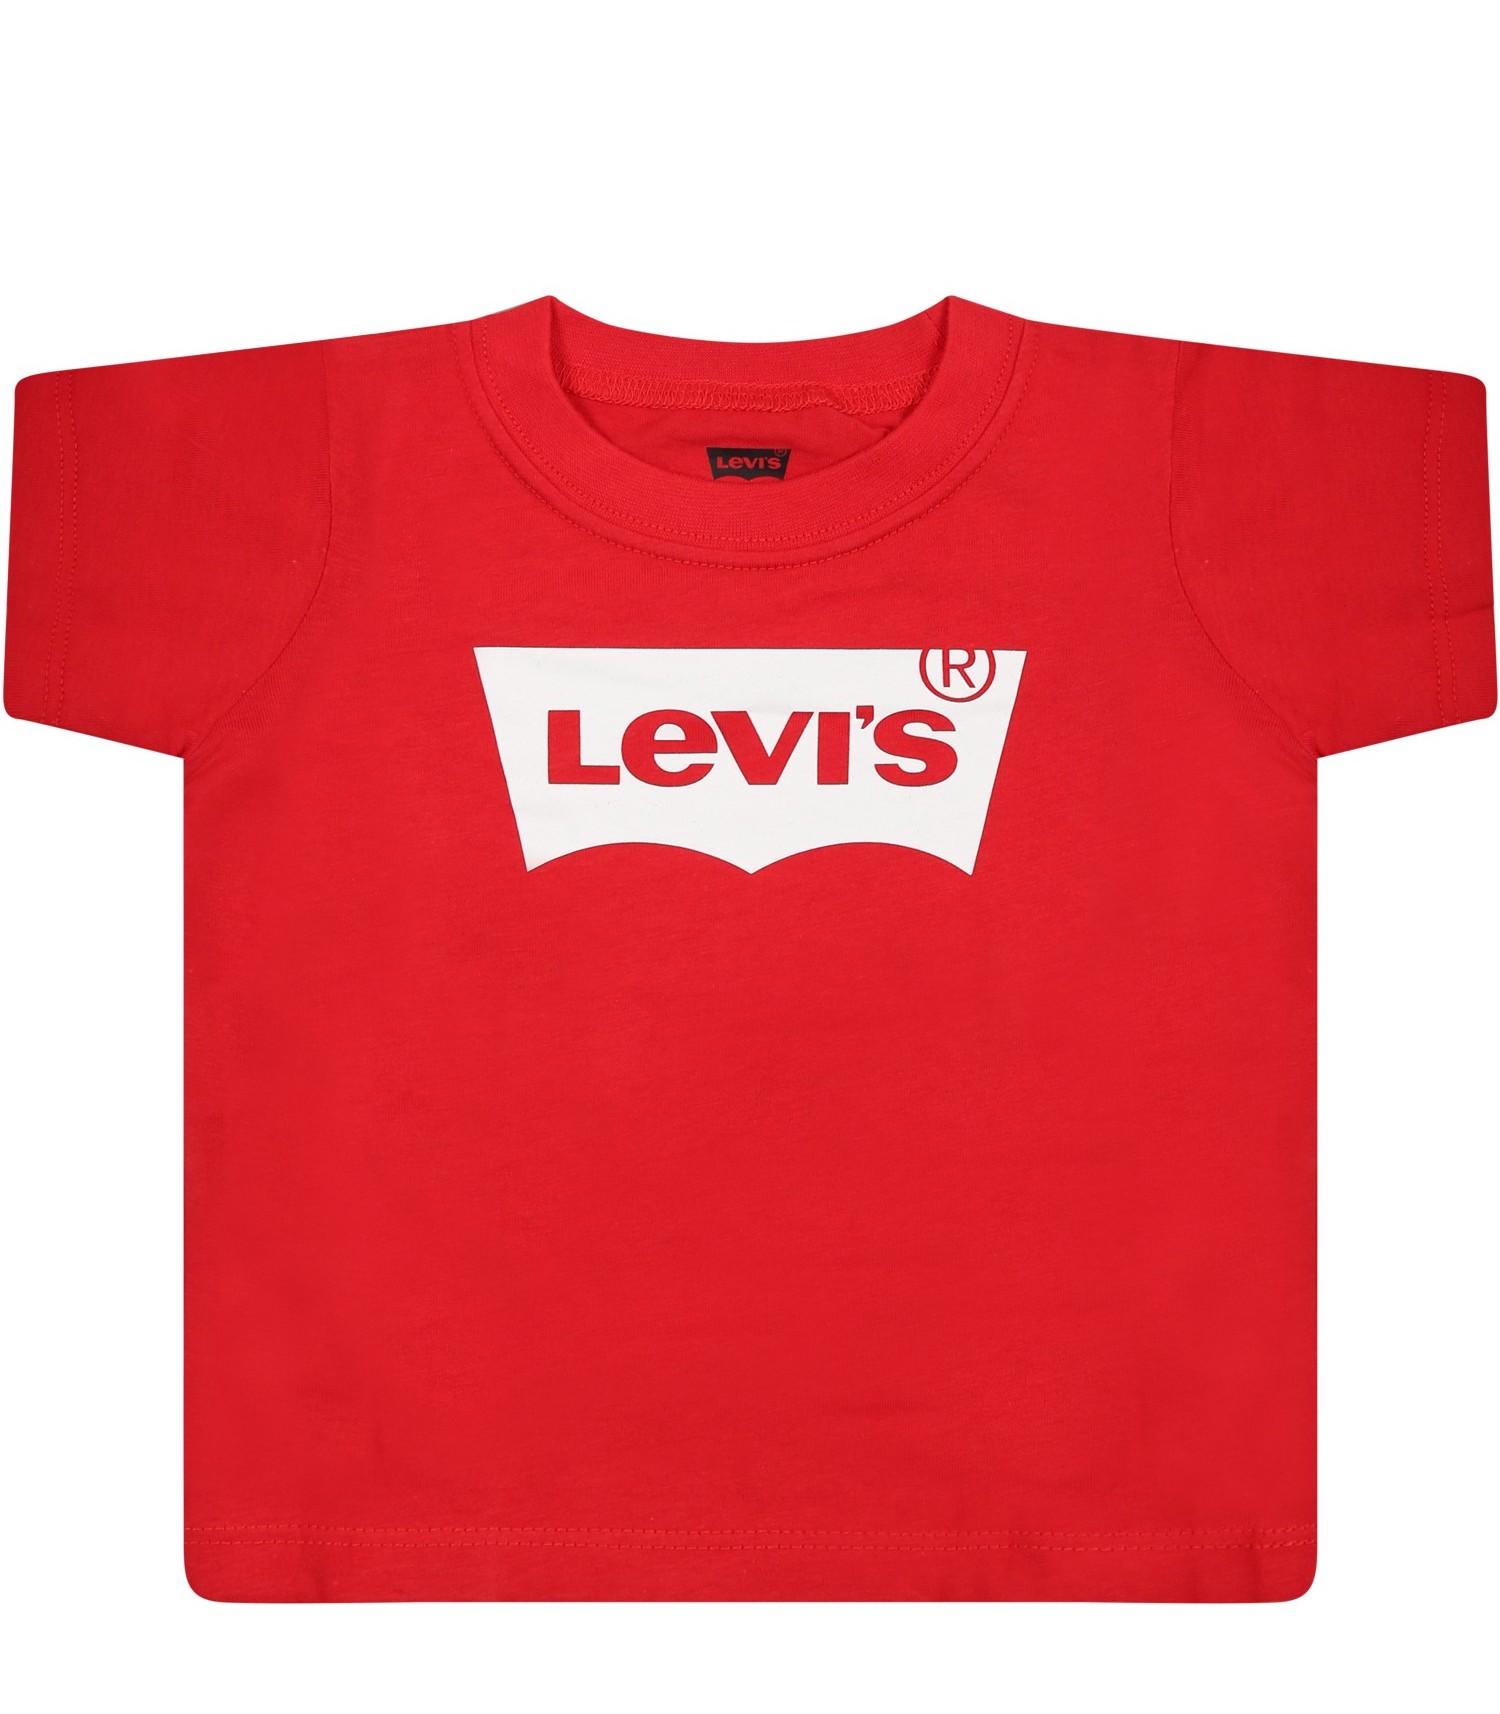 Levi's Kids Red t-shirt for baby kids with white logo print - CoccoleBimbi